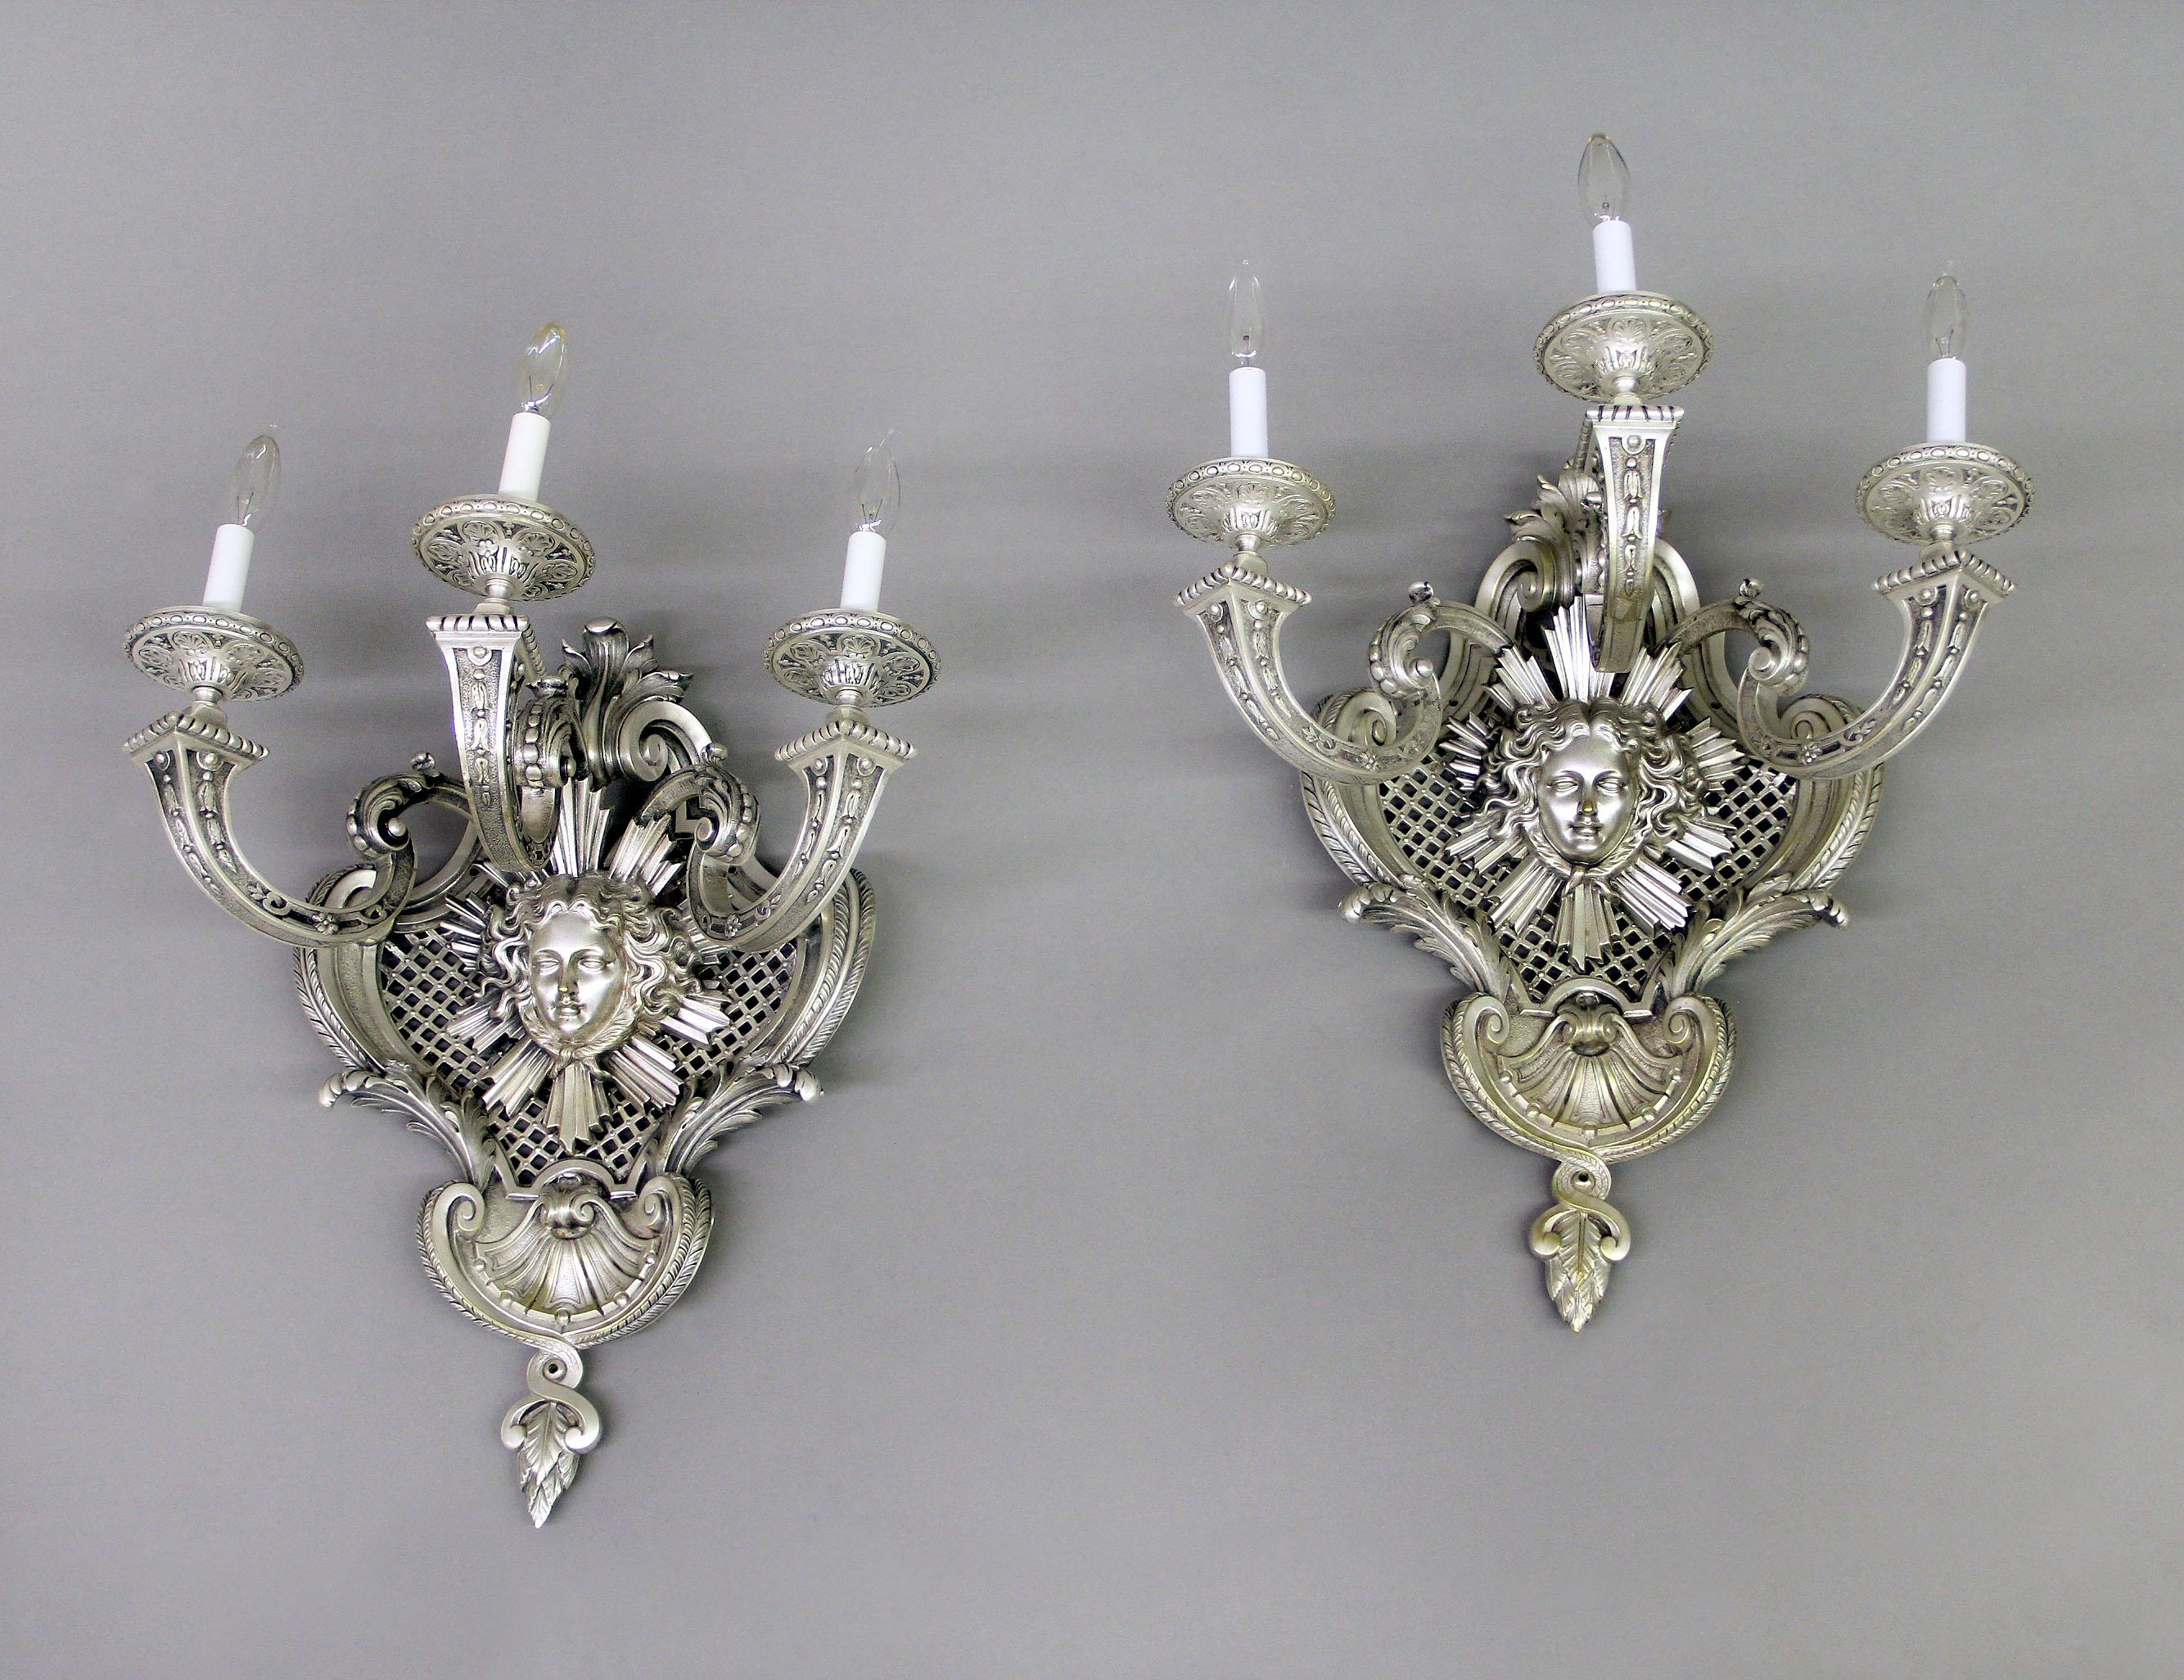 A very fine pair of late 19th century silvered bronze three light sconces

Centered with a mask of Apollo with rays of light, sitting on a reticulated base. Heavy chiseled detailed arms and cups, the top and base with foliage and shell